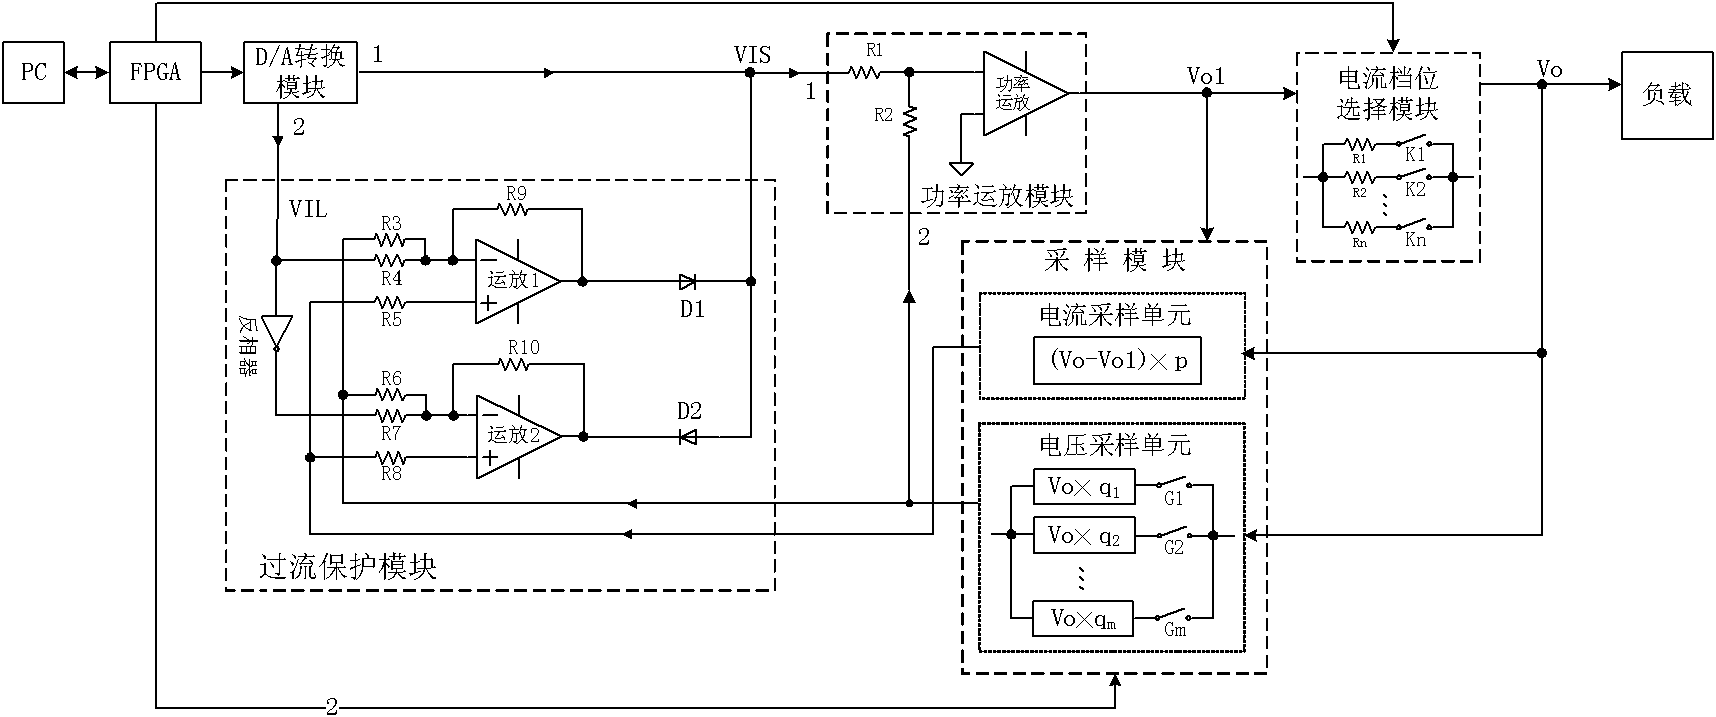 Numerical-control direct-current current source